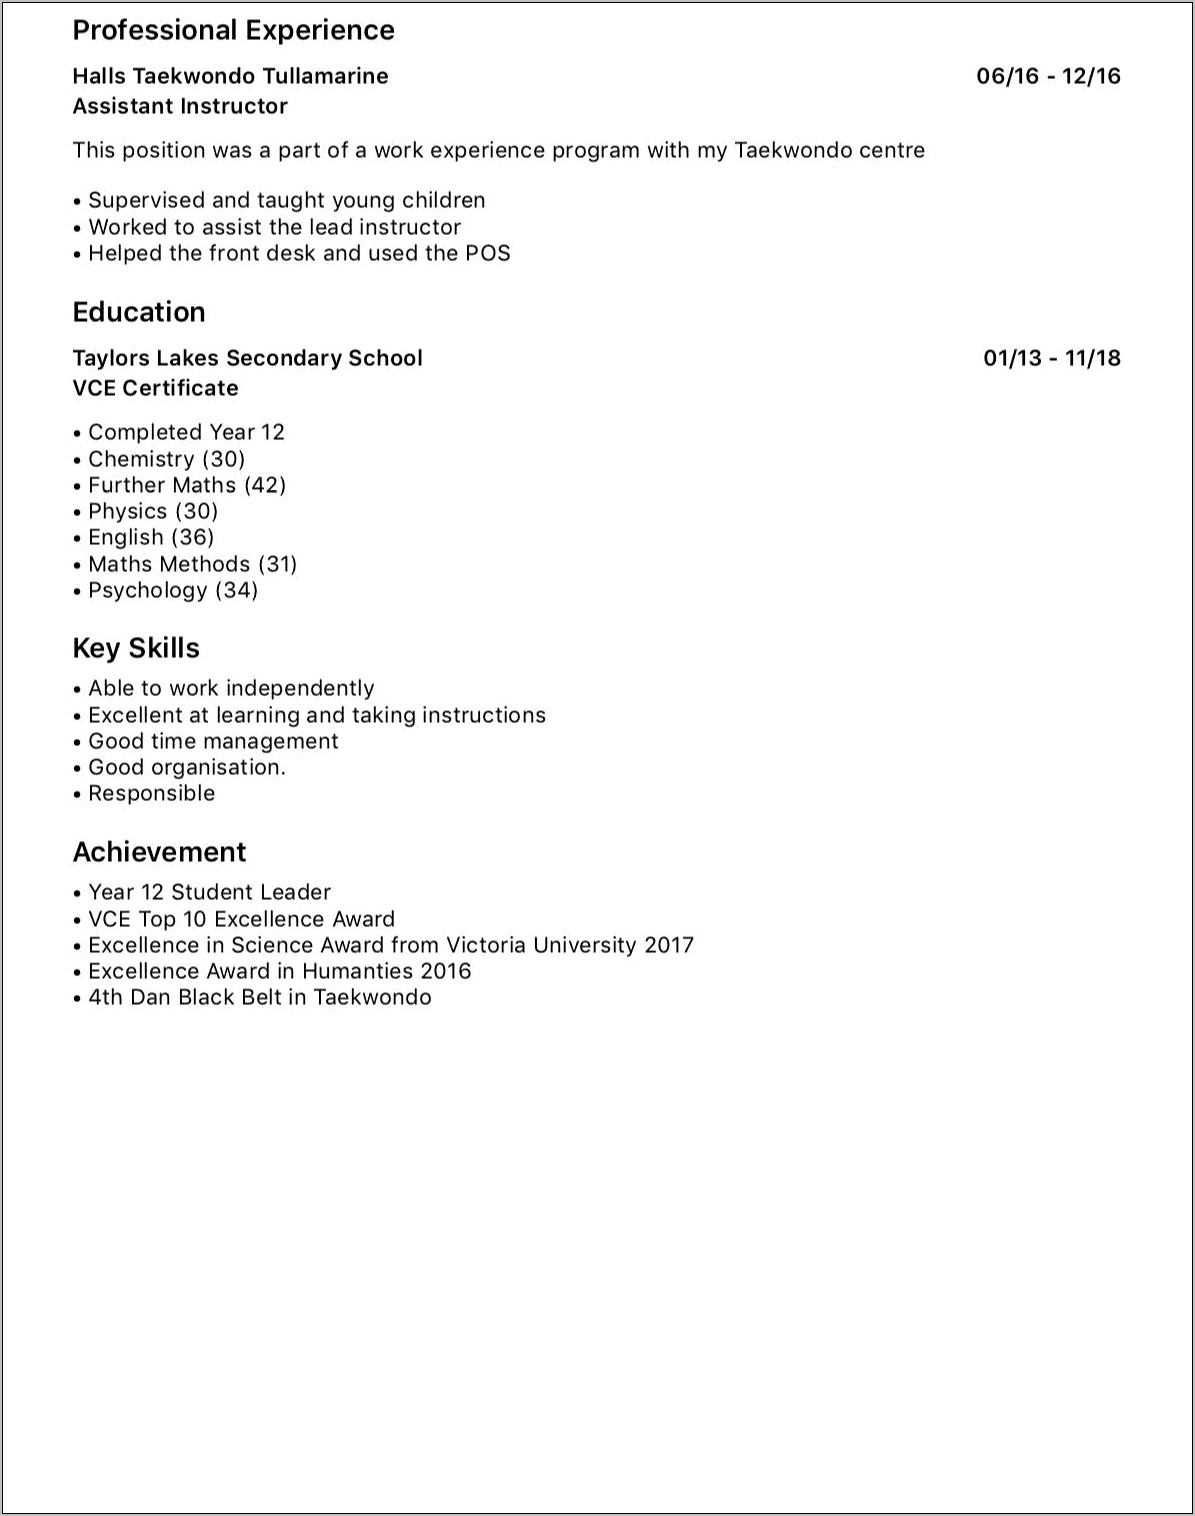 Resume With No Job Experience Reddit